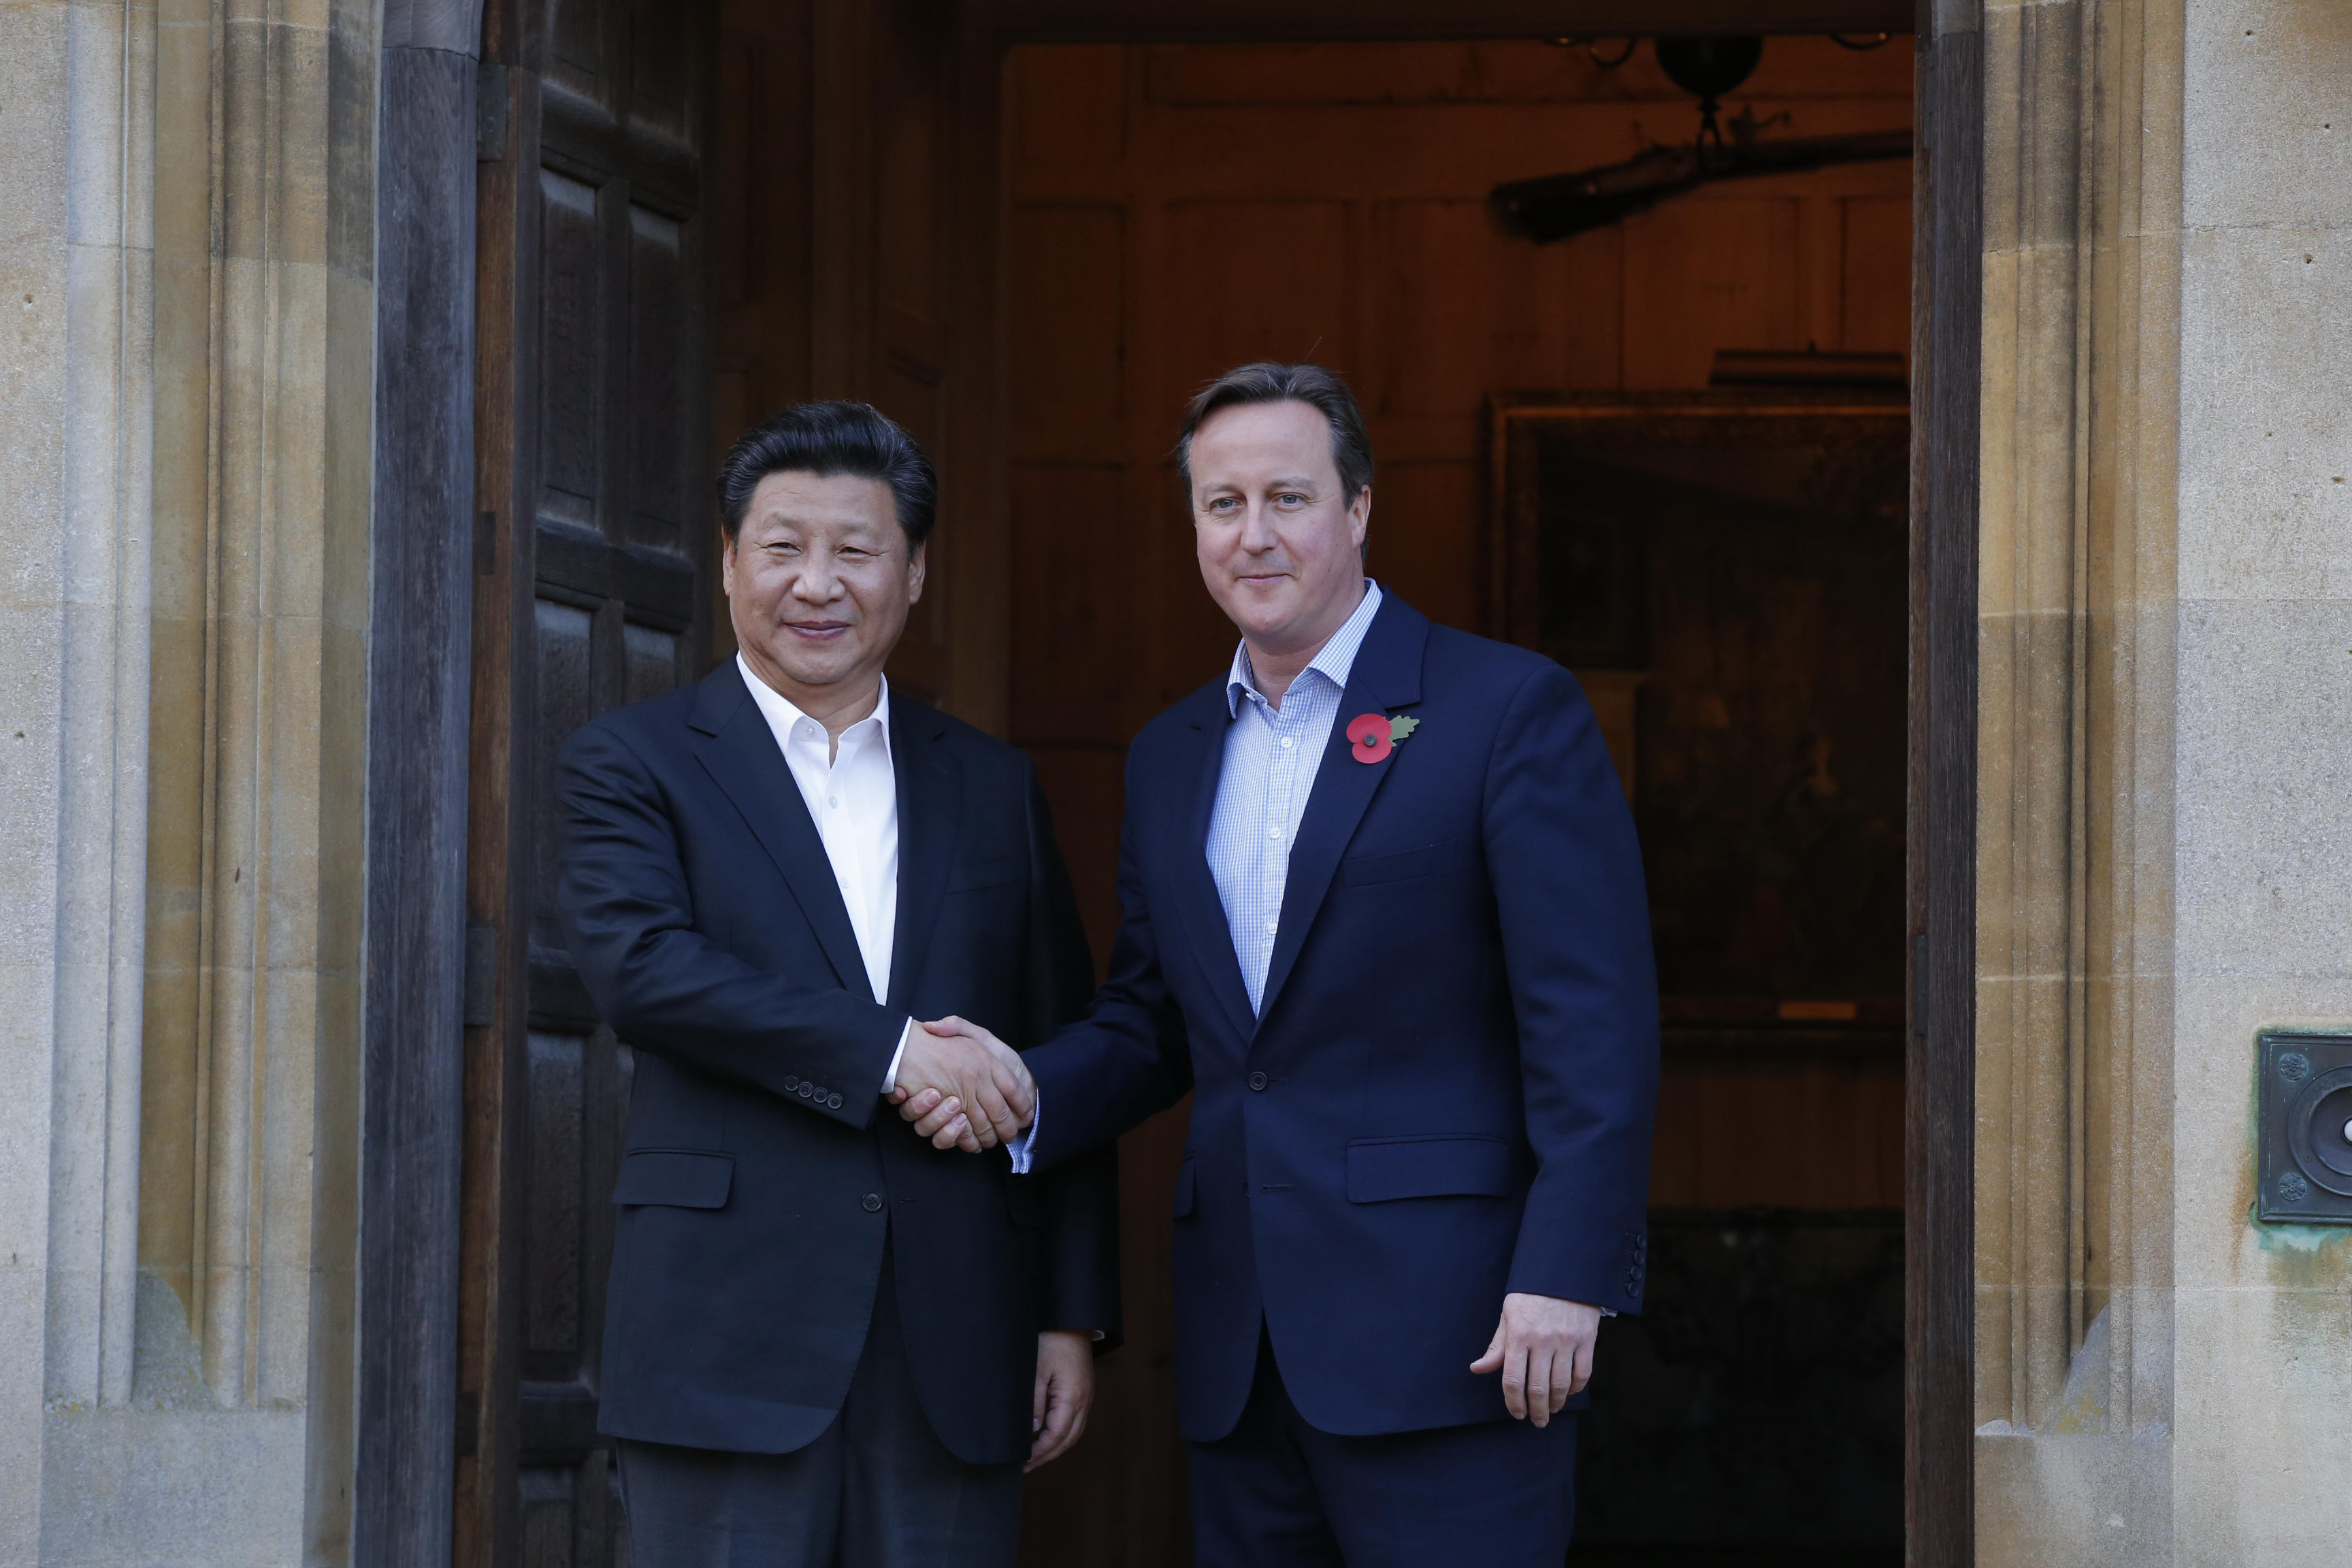  British Prime Minister David Cameron (right) greets China's President Xi Jinping at Chequers, his official country retreat, on Thursday. Photo: Xinhua